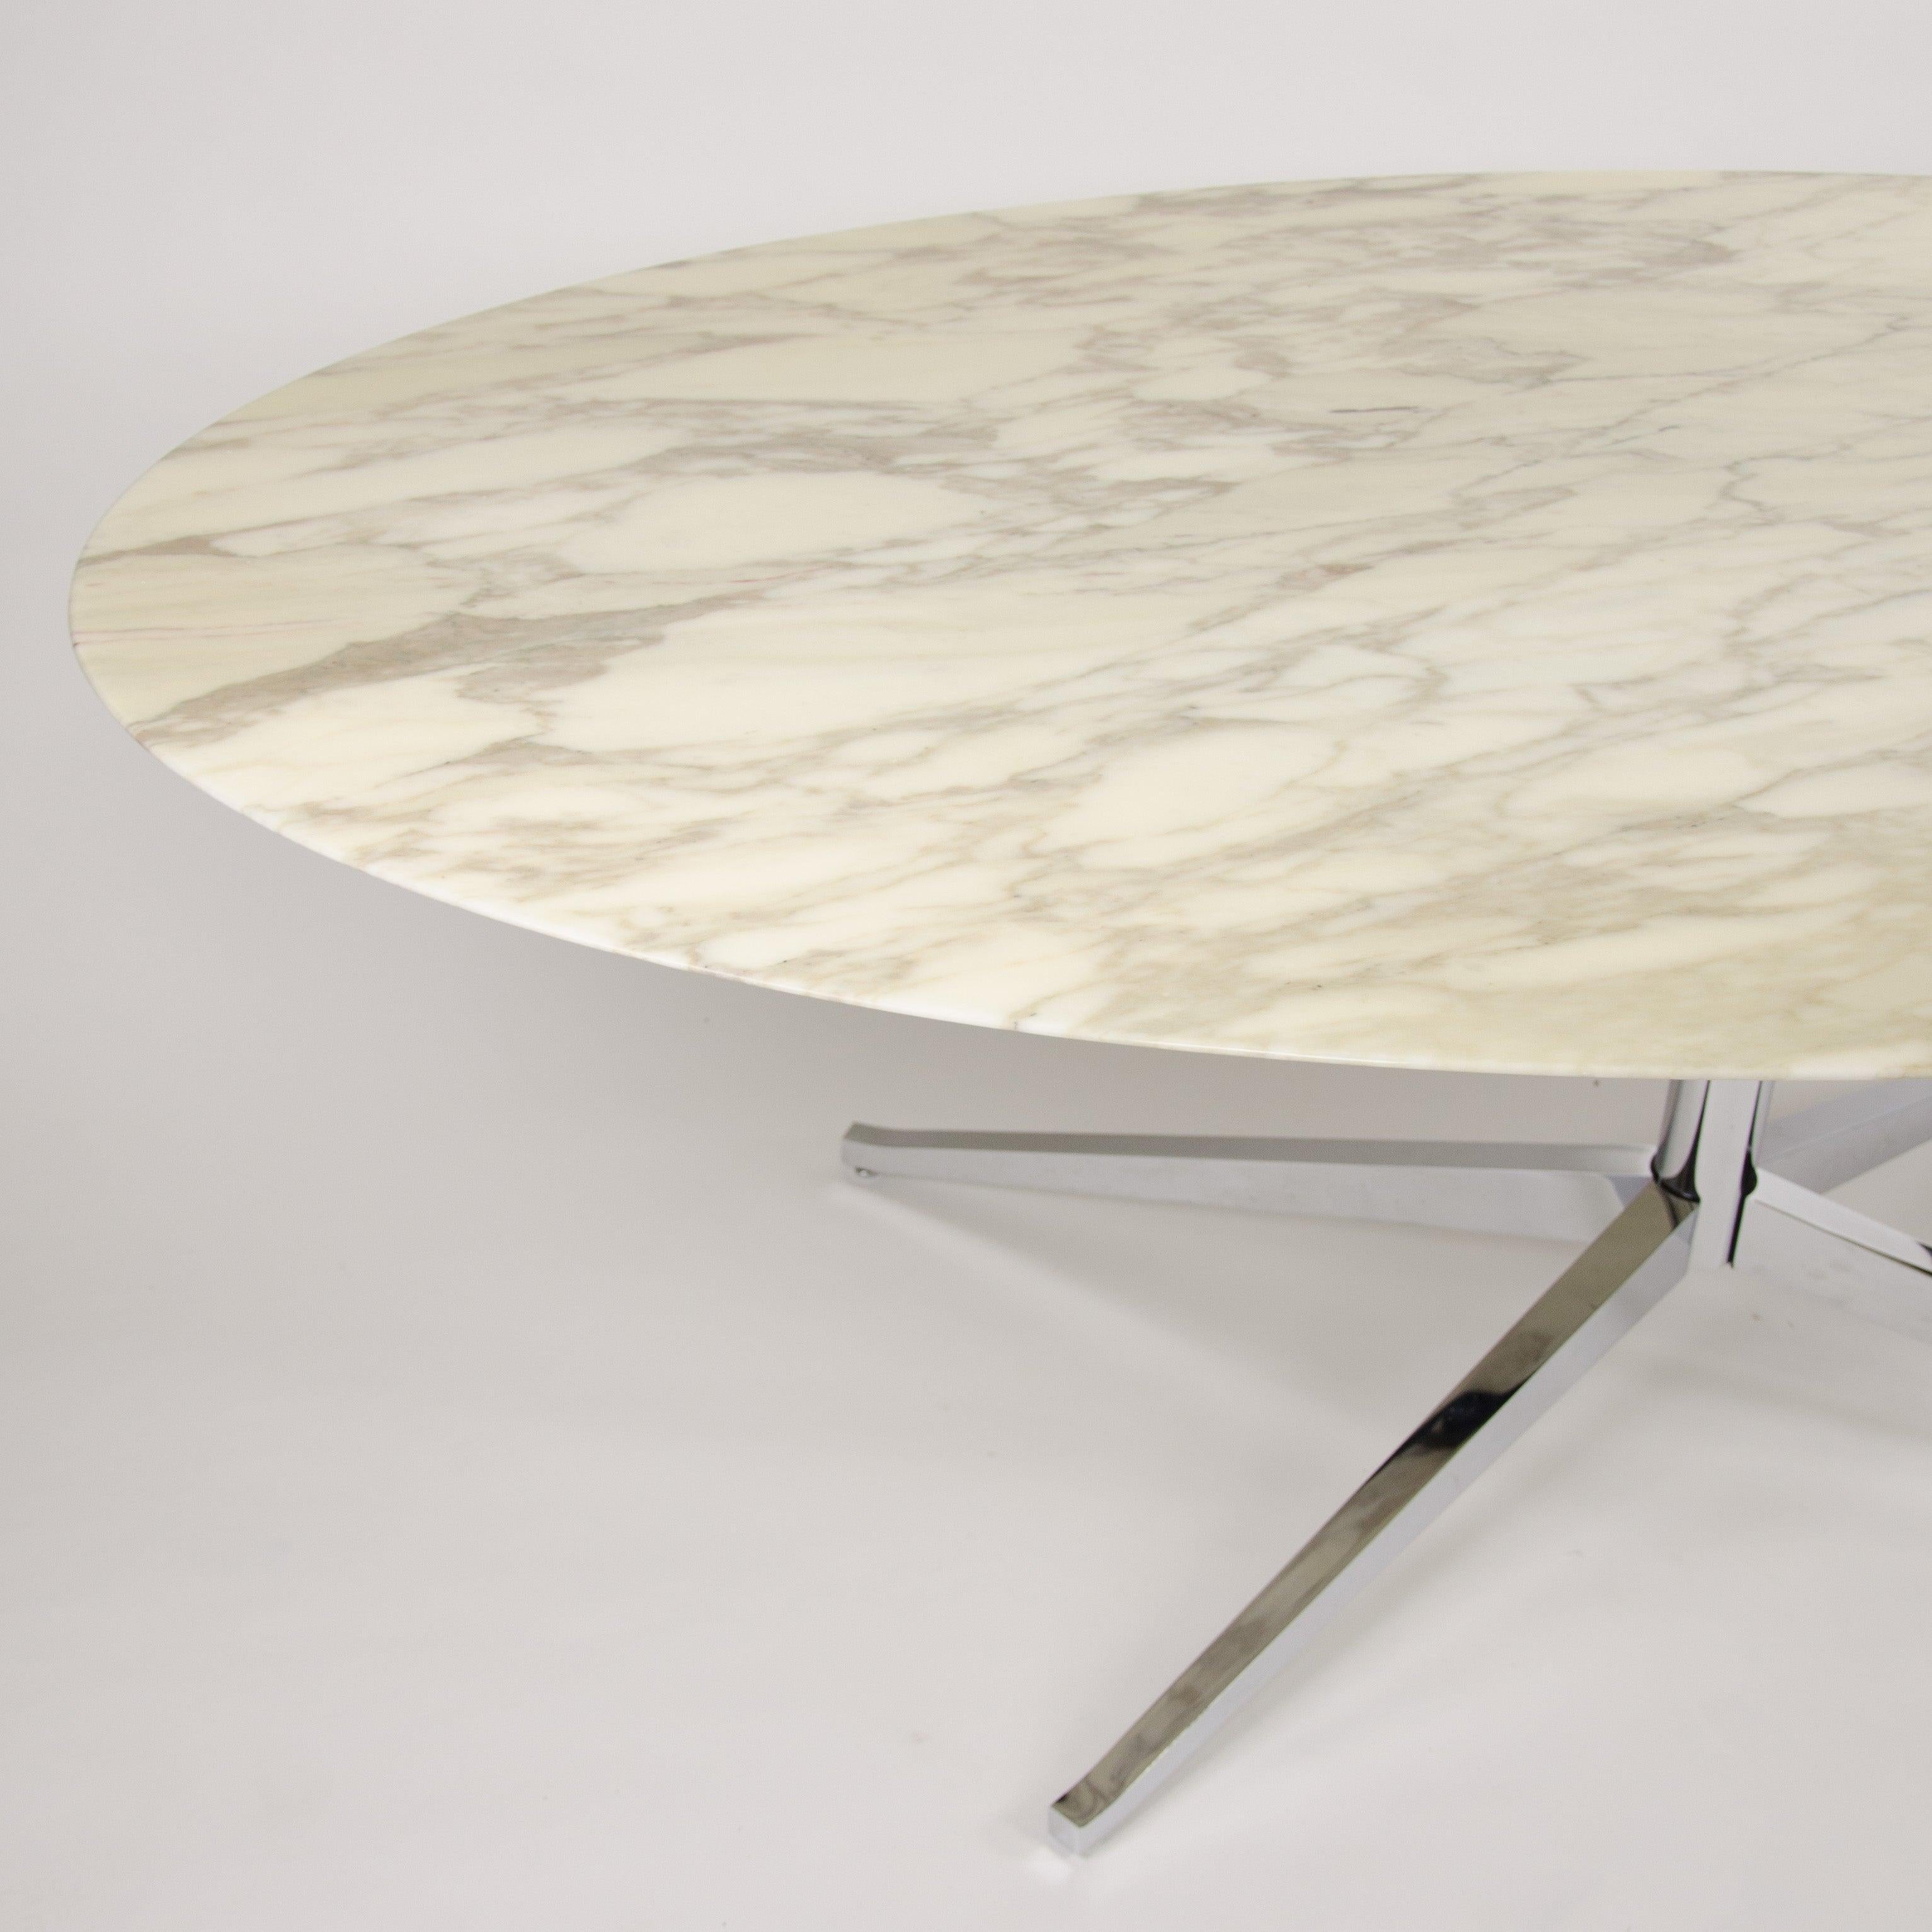 2007 Florence Knoll 78 in Calacatta Marble Dining Conference Table 2x Available en vente 2